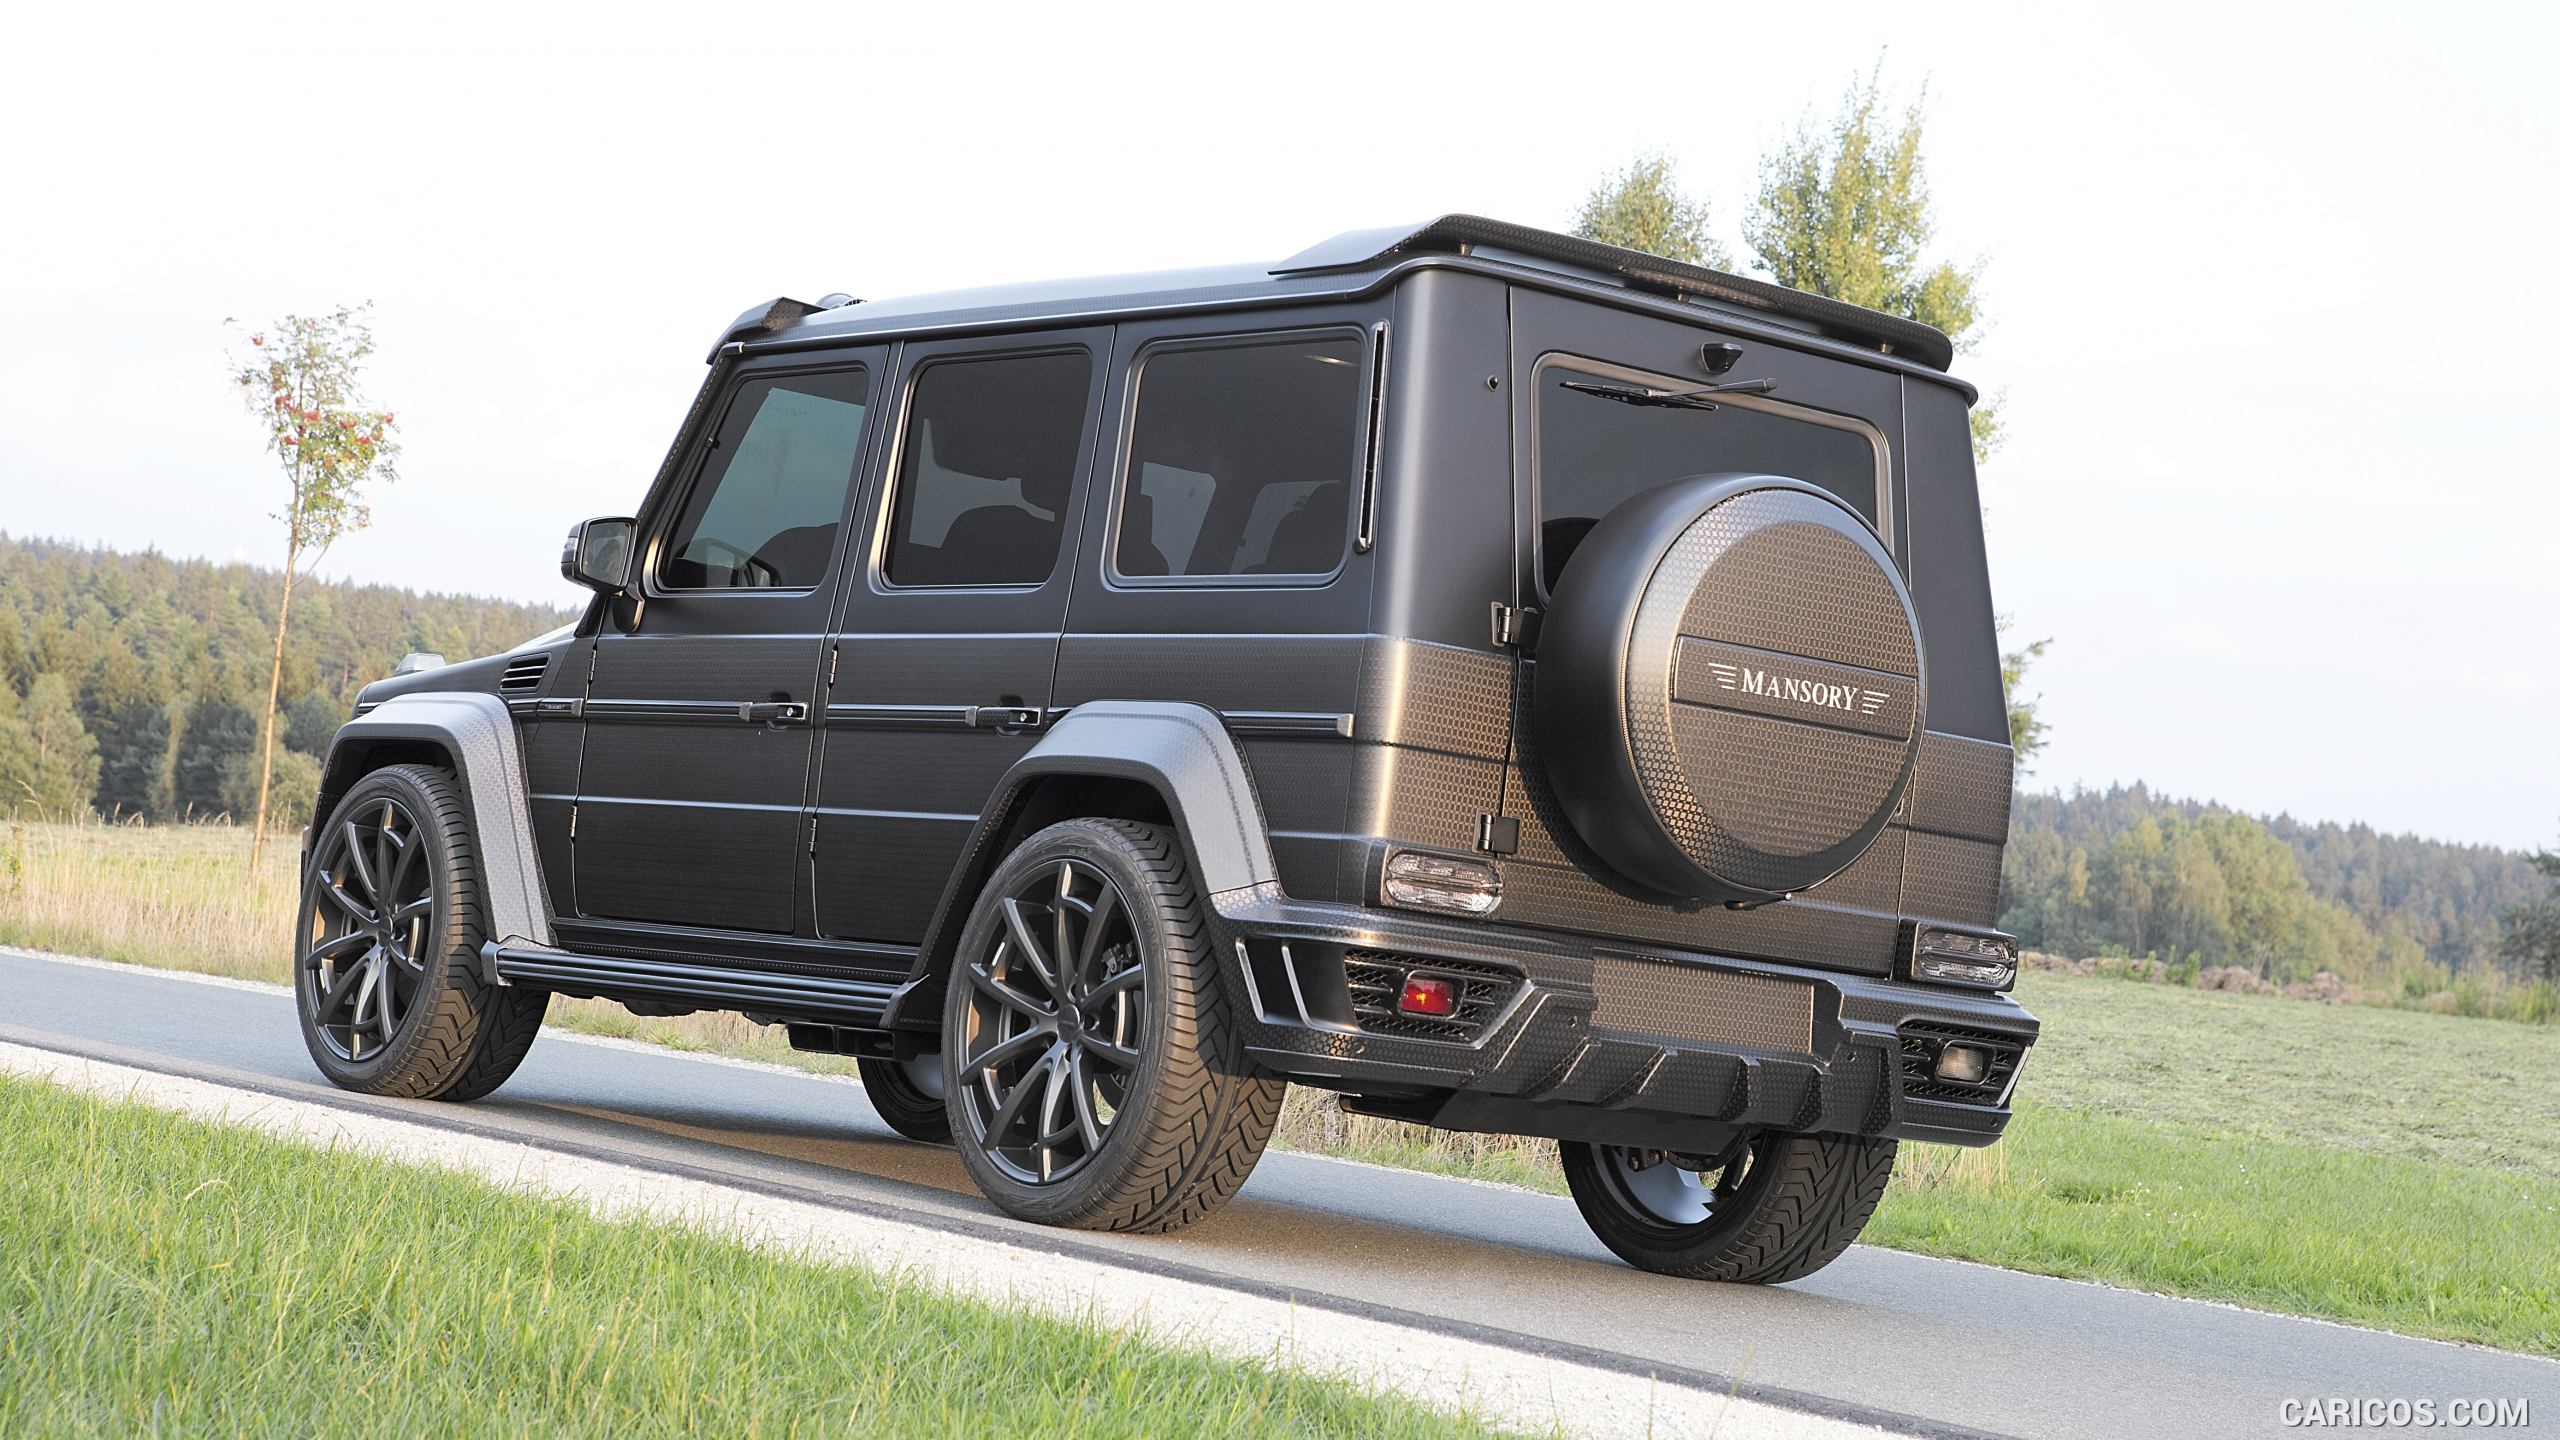 2016 MANSORY GRONOS Black Edition based on Mercedes G63 AMG - Rear, #6 of 16